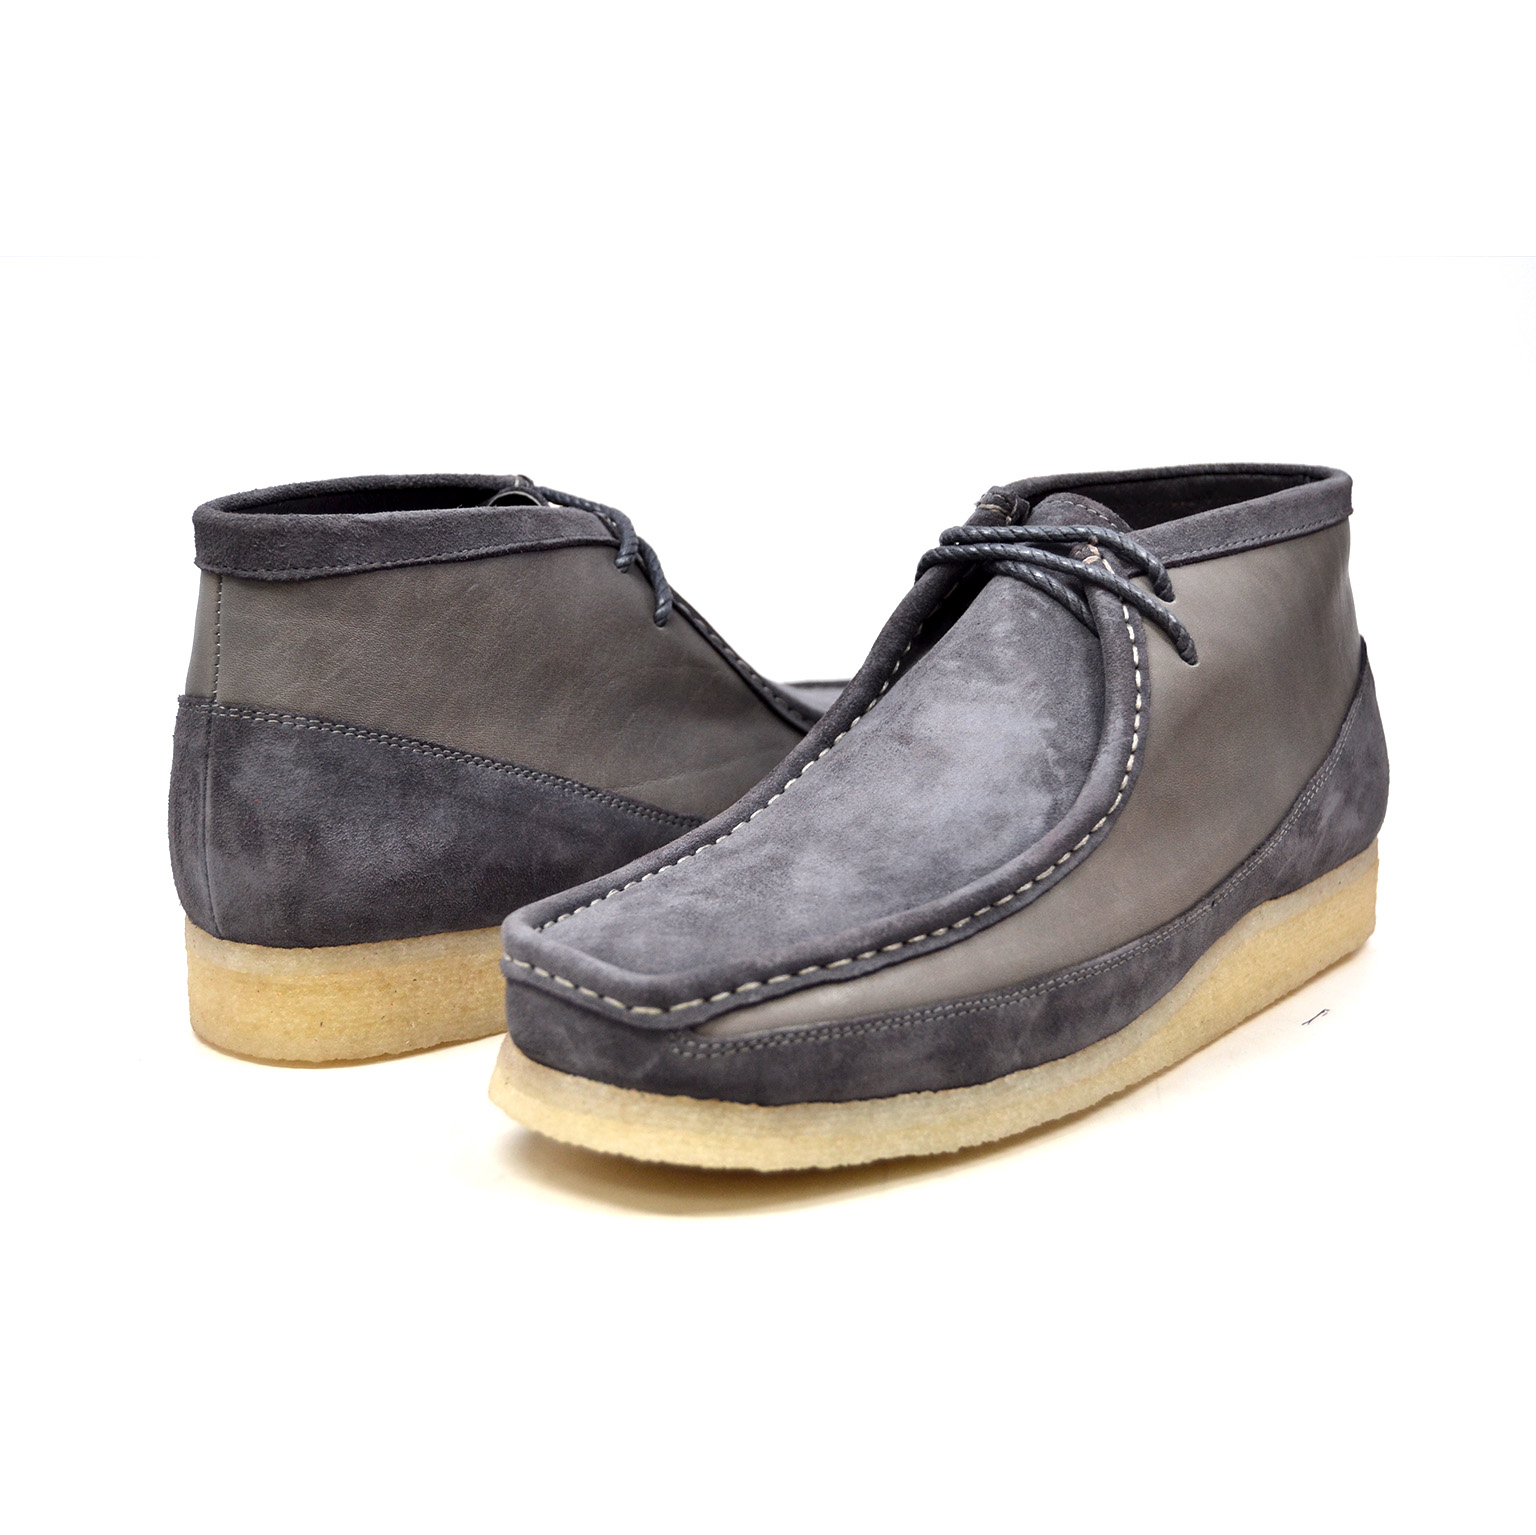 British Collection Walkers-Gray Leather and Suede [100100-06] - $170.00 ...